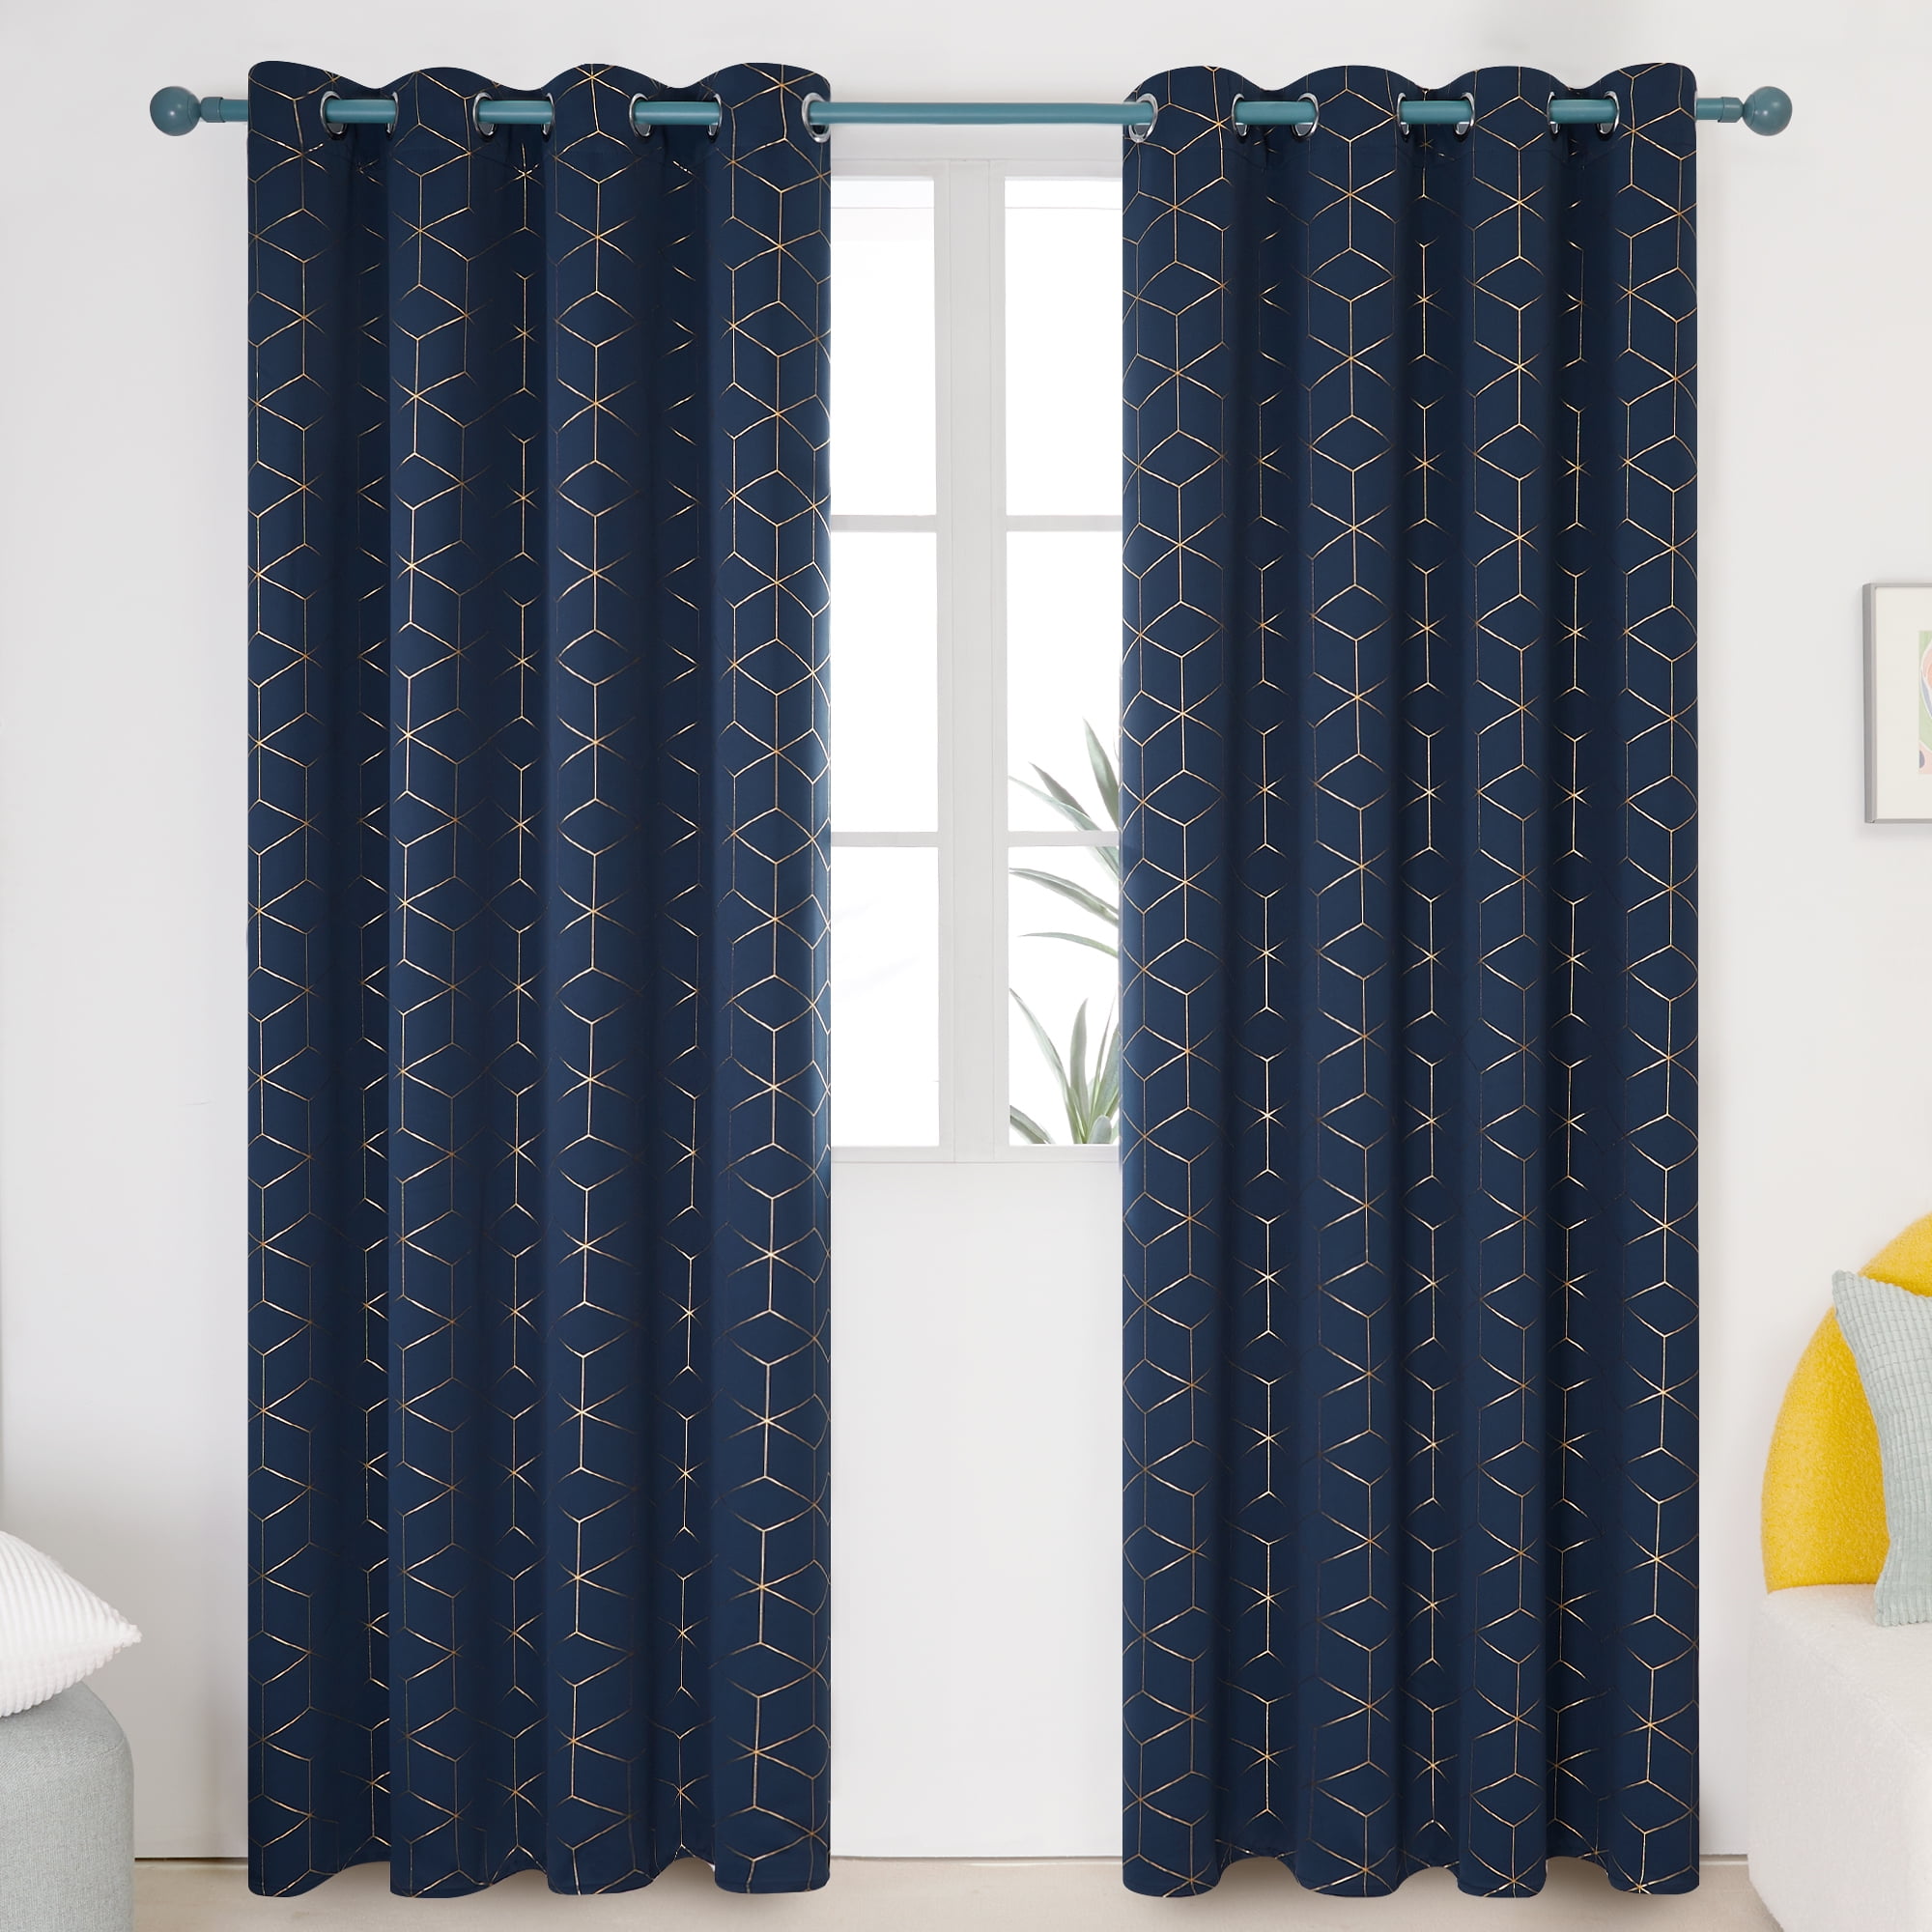 Deconovo Thermal Insulated Blackout Curtains Grommet Sliver Diamond Foil Print Room Darkening Curtain Panel for Bedroom 42x63 Inch Navy Blue Set of 2